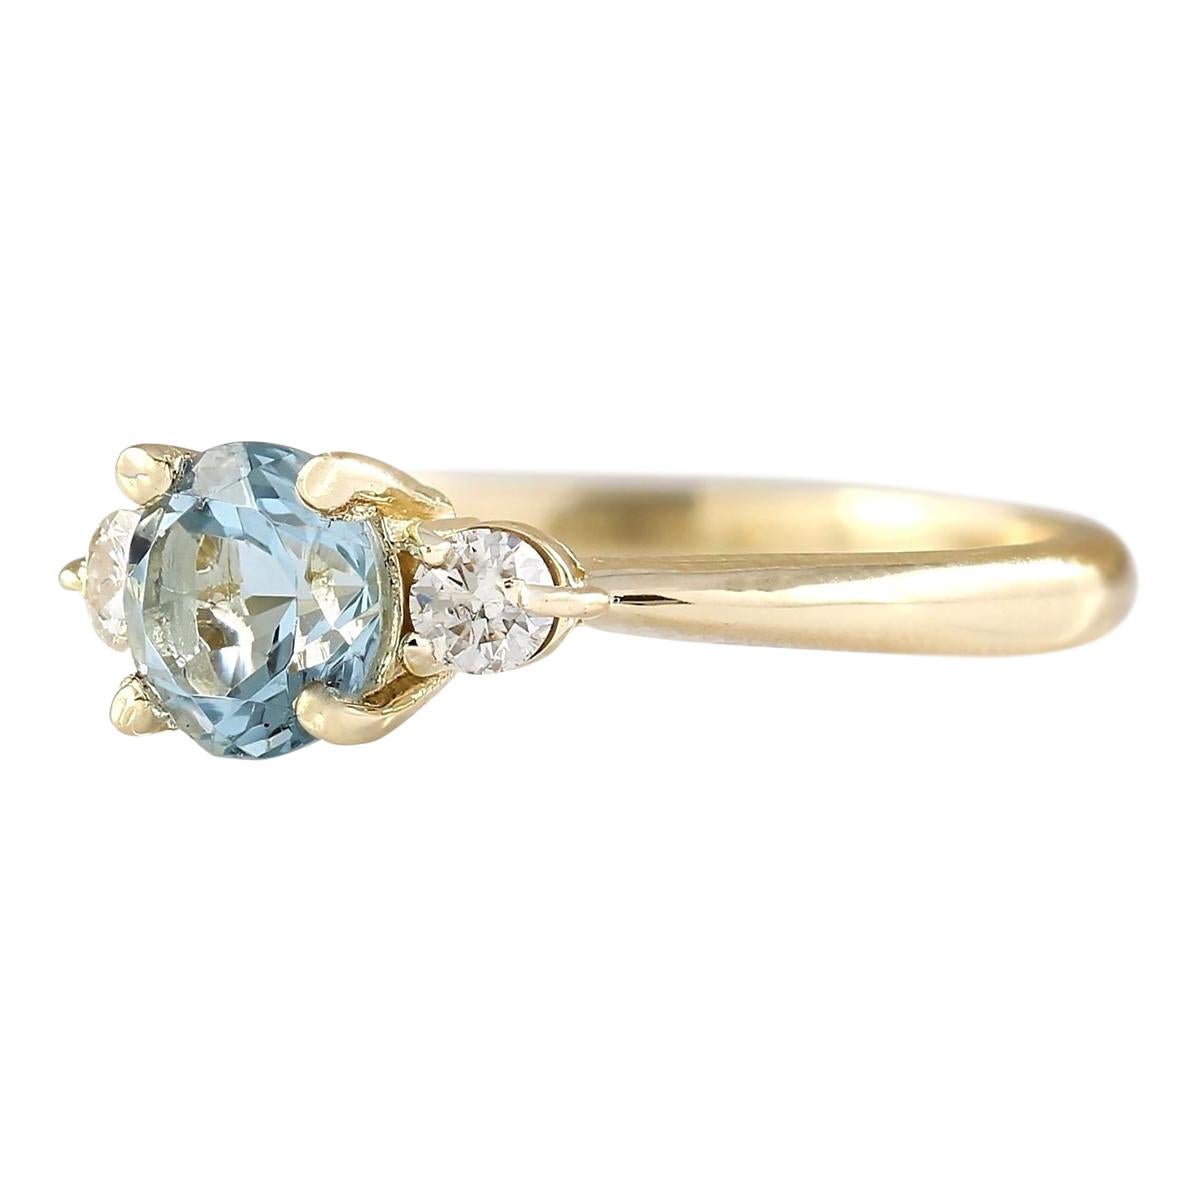 Stamped: 14K Yellow Gold
Total Ring Weight: 2.2 Grams
Total Natural Aquamarine Weight is 1.00 Carat (Measures: 6.00x6.00 mm)
Color: Blue
Total Natural Diamond Weight is 0.20 Carat
Color: F-G, Clarity: VS2-SI1
Face Measures: 6.00x11.85 mm
Sku: